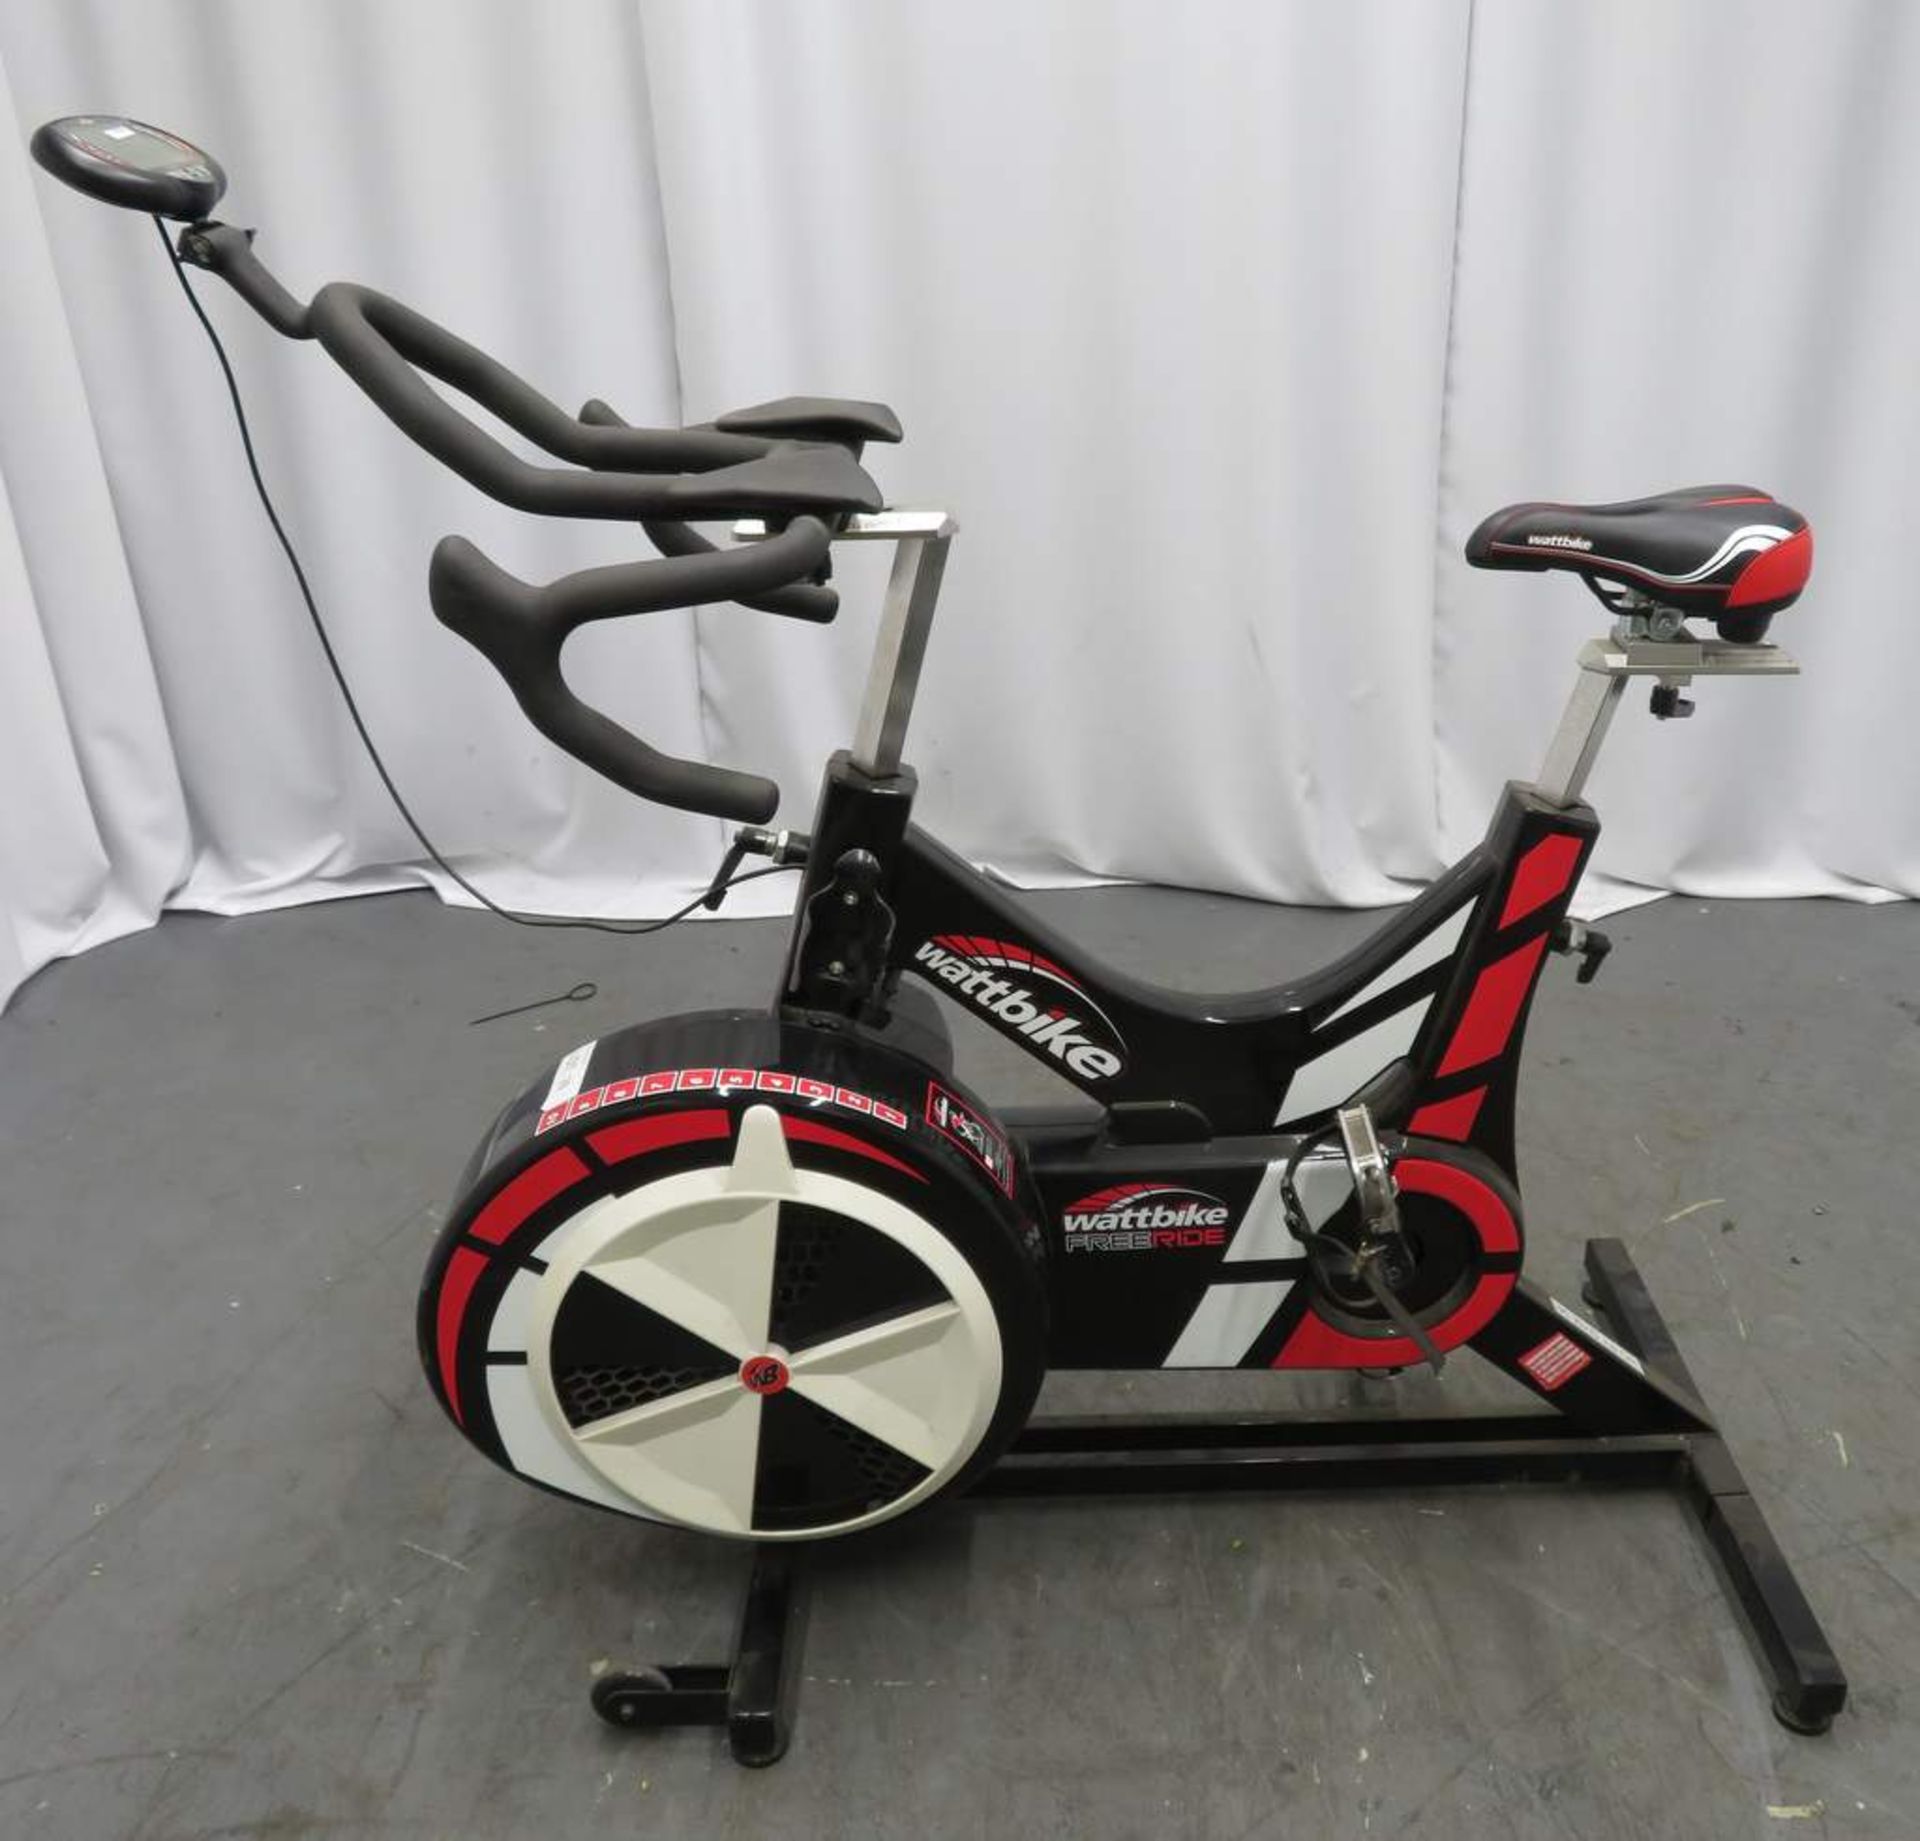 Watt Bike Free Ride Exercise Bike, Complete With Console. - Image 2 of 8